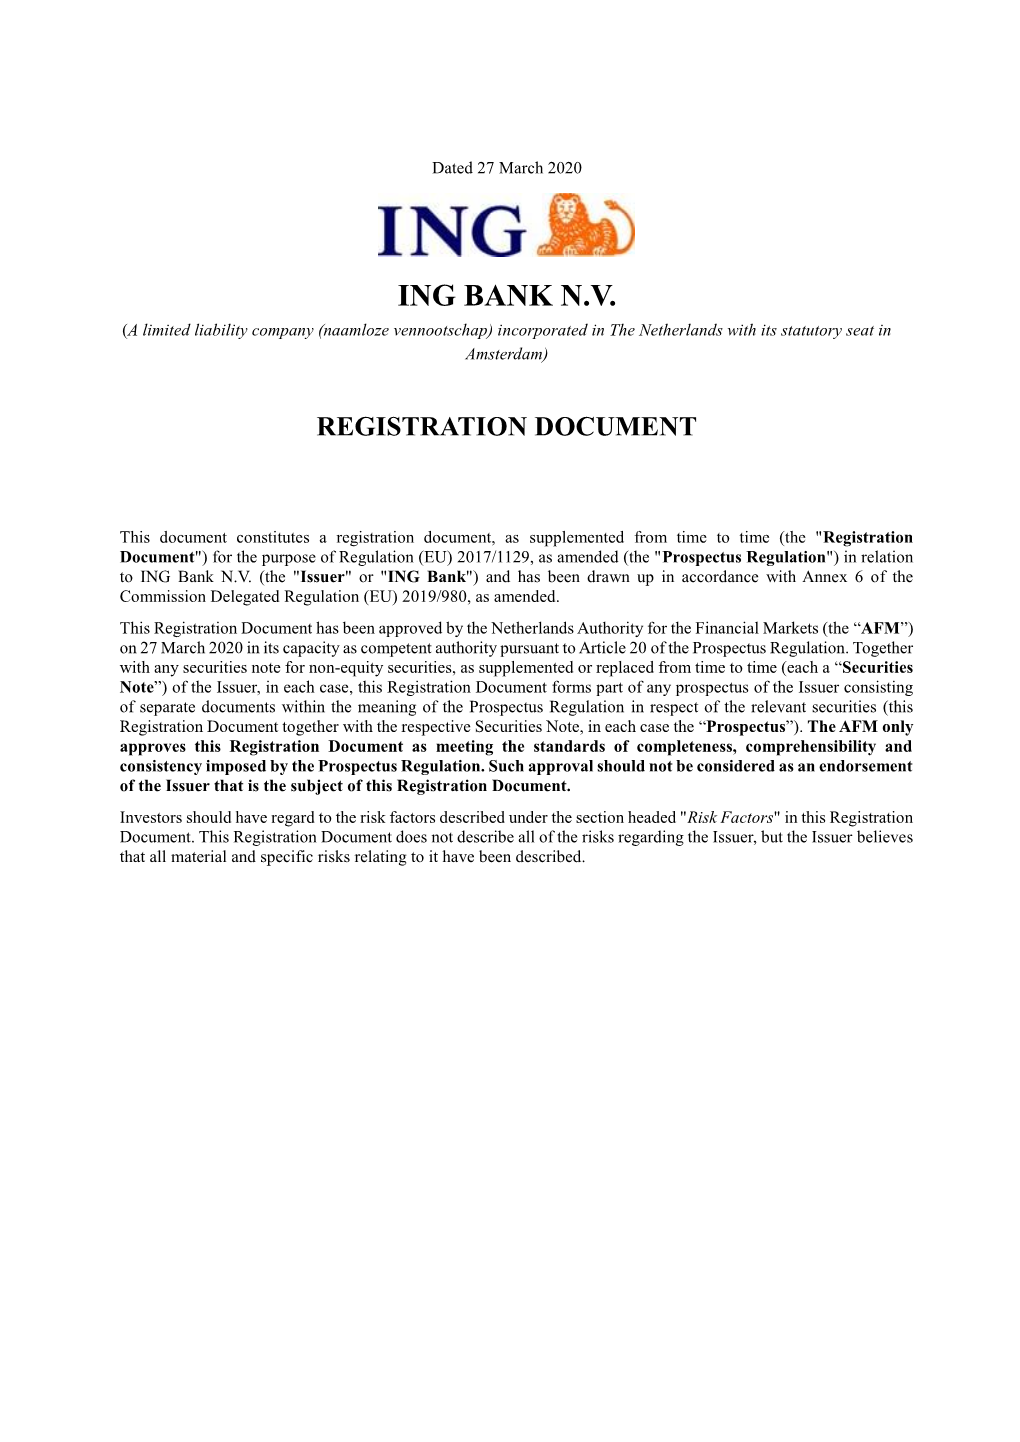 ING BANK N.V. (A Limited Liability Company (Naamloze Vennootschap) Incorporated in the Netherlands with Its Statutory Seat in Amsterdam)